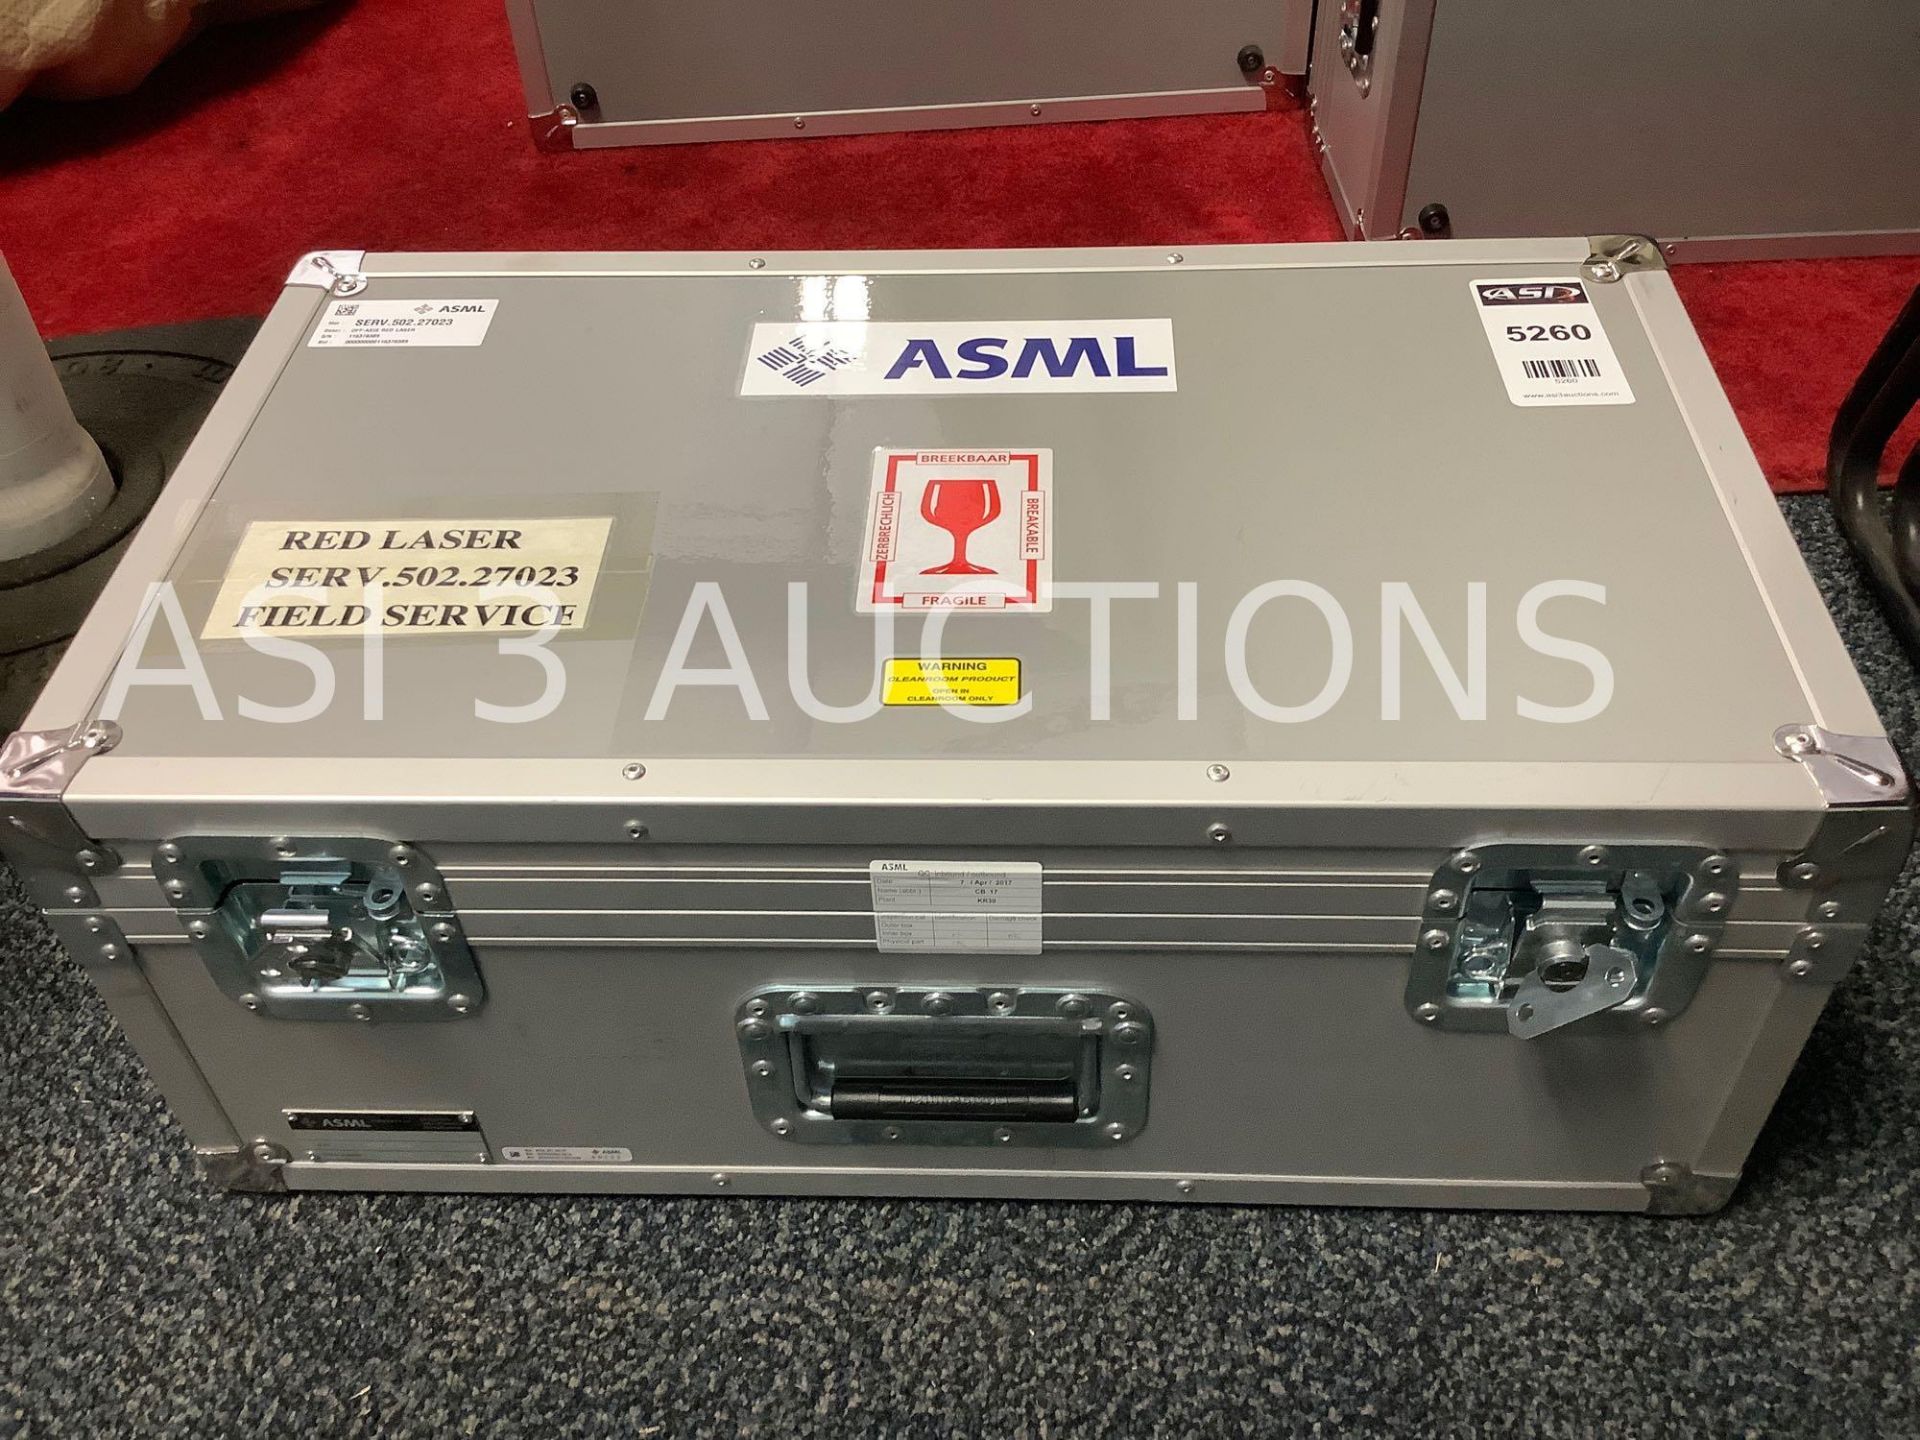 2017 ASML CB 17 PLANT KR30 SERV 502.27023 FIELD SERVICE OFF AXIS RED LASER POWER (maw) 15.21 (3.84) - Image 6 of 7